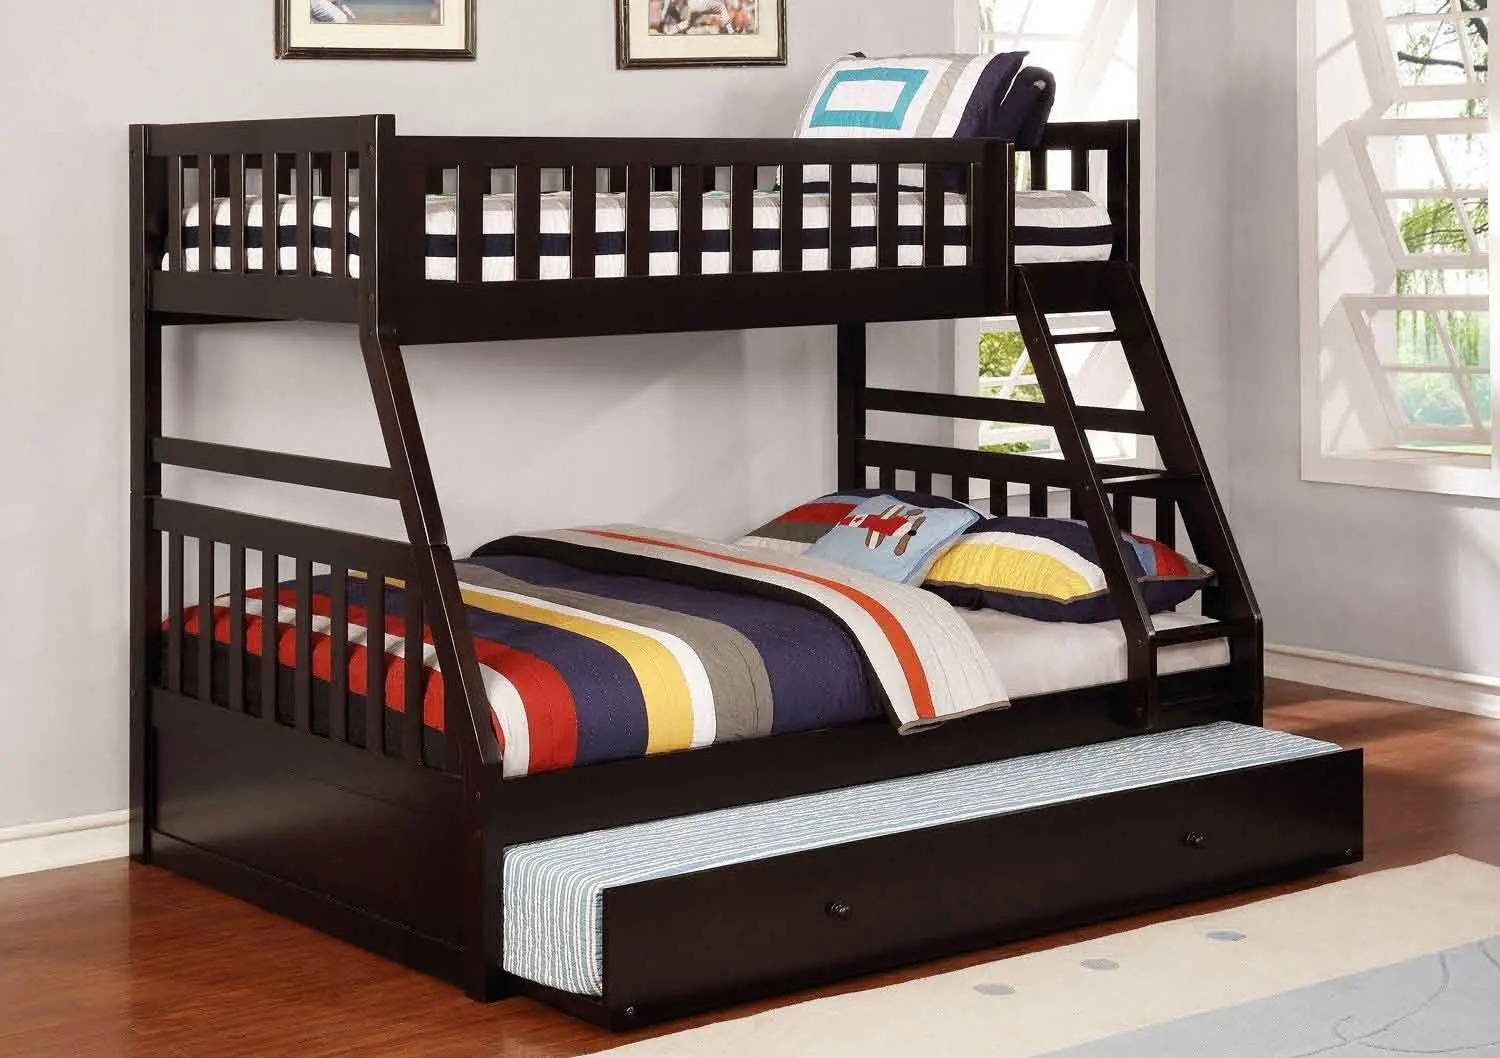 The Caden Bunk Bed Review